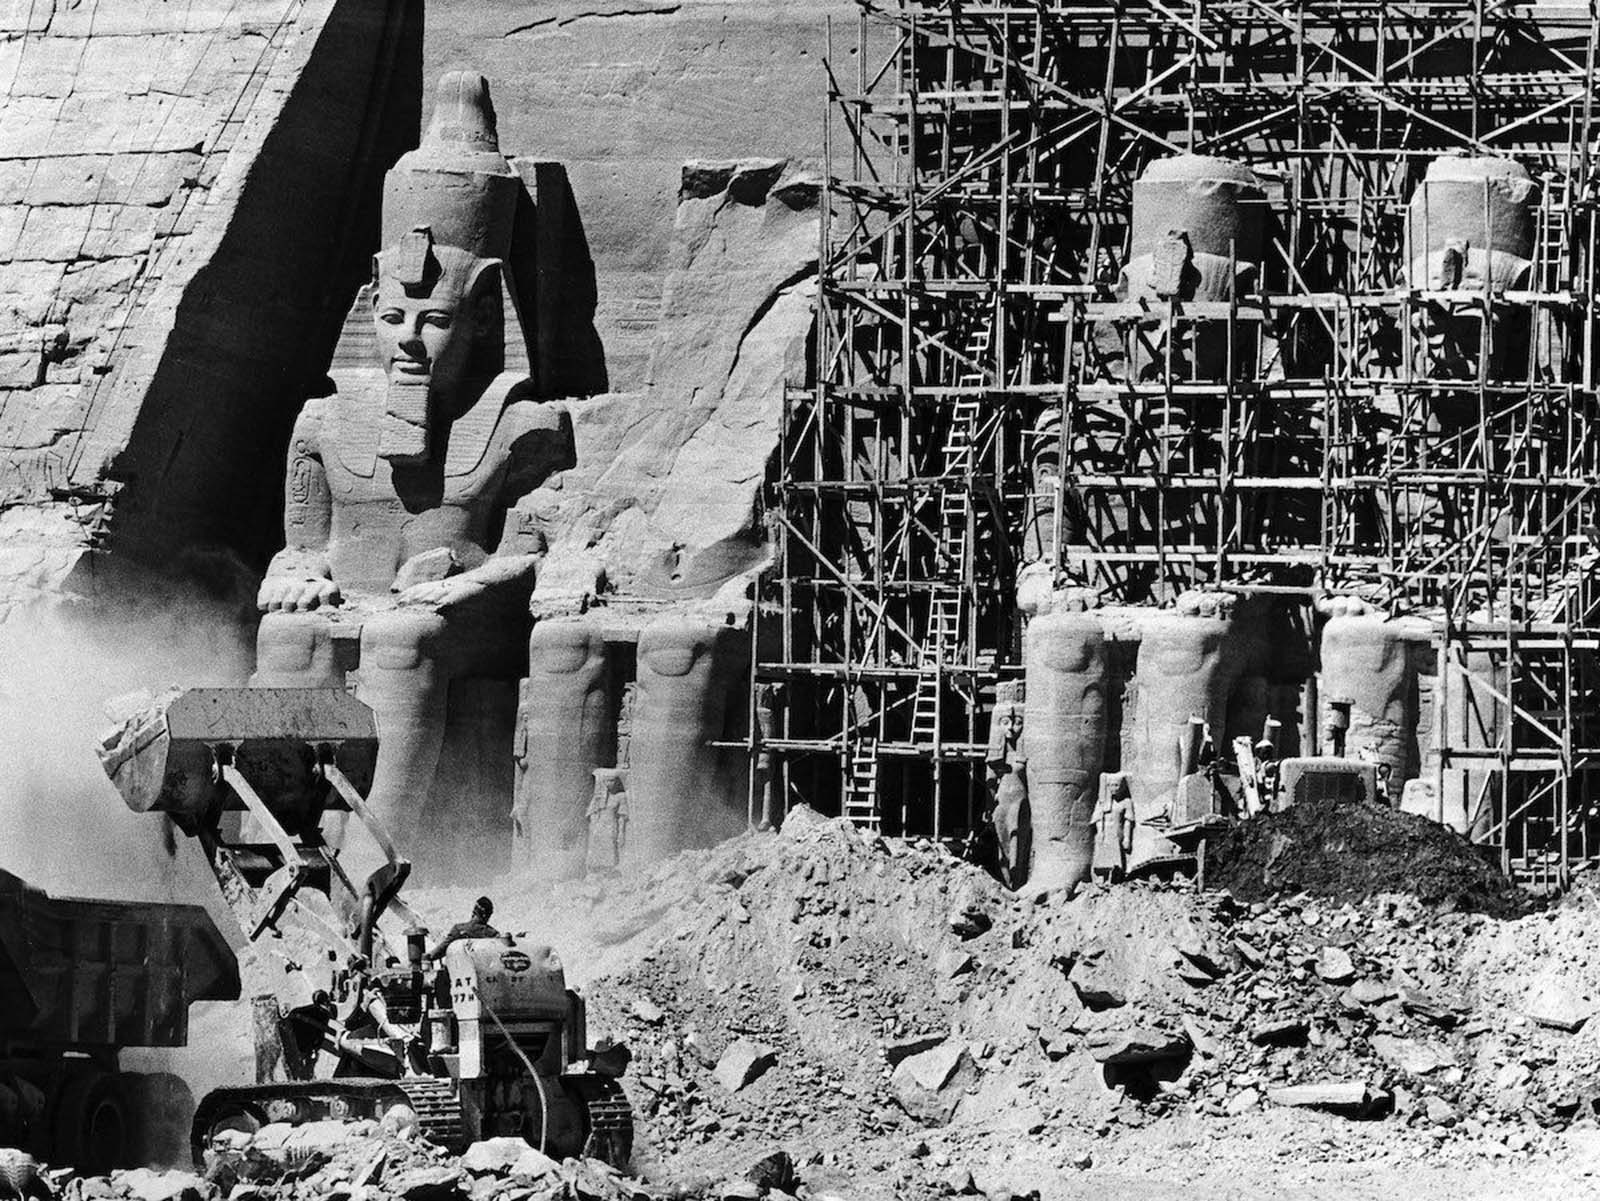 Vintage Photographs Show the Egyptian Temples of Abu Simbel being  Relocated, 1964-1968 - Rare Historical Photos